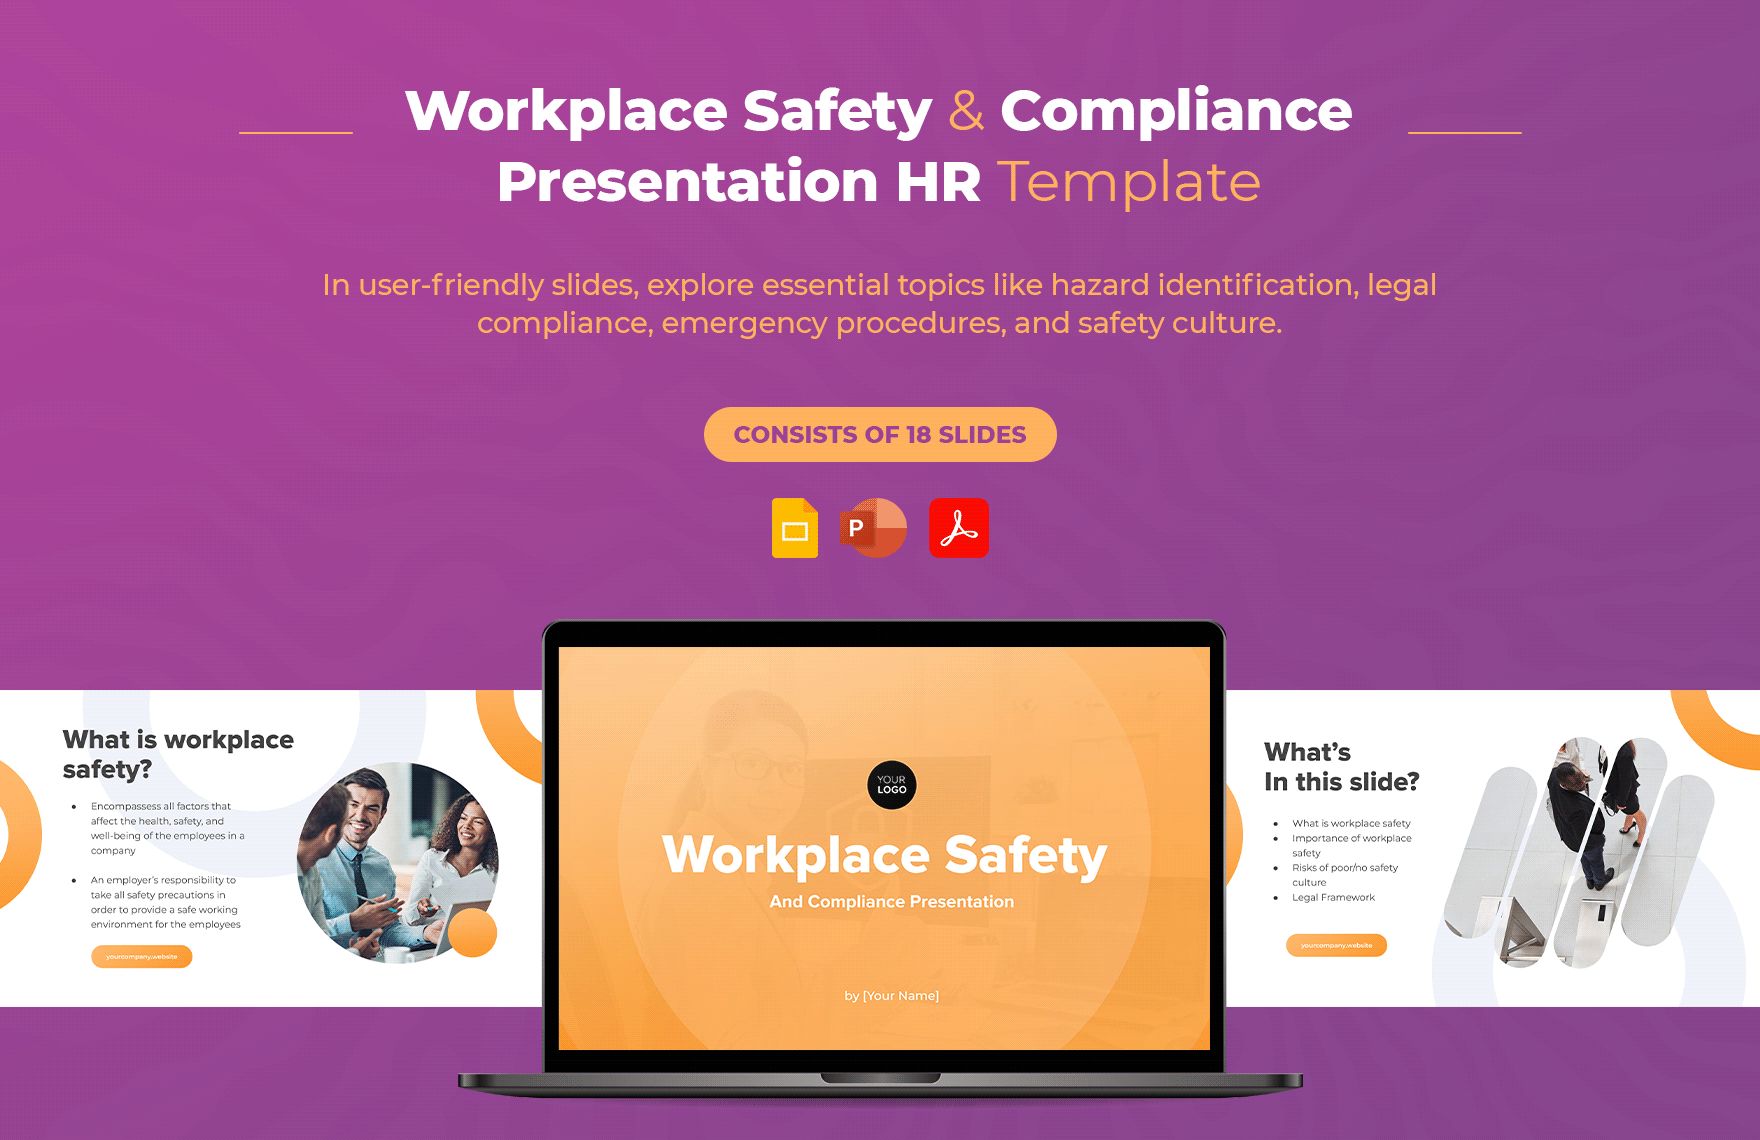 Workplace Safety and Compliance Presentation HR Template